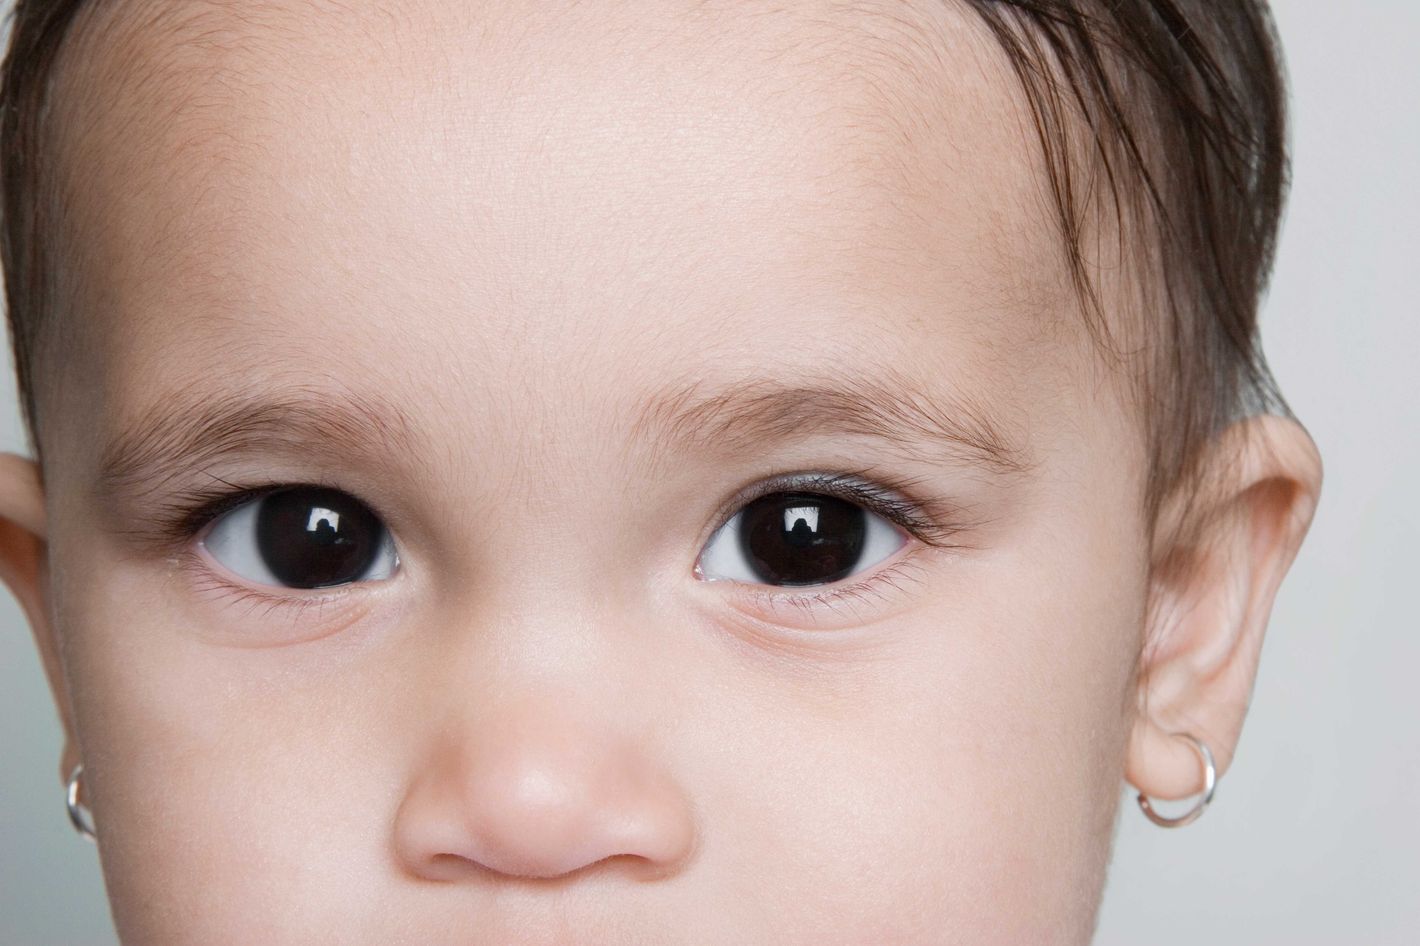 Specializing in Piercing Infants thru Adults - No body Piercing!  Specializing in Piercing 'Infants thru Adults - No body Piercing! - Baby  Ear Piercing - Infant Ear Piercing - Ear Piercing babies 